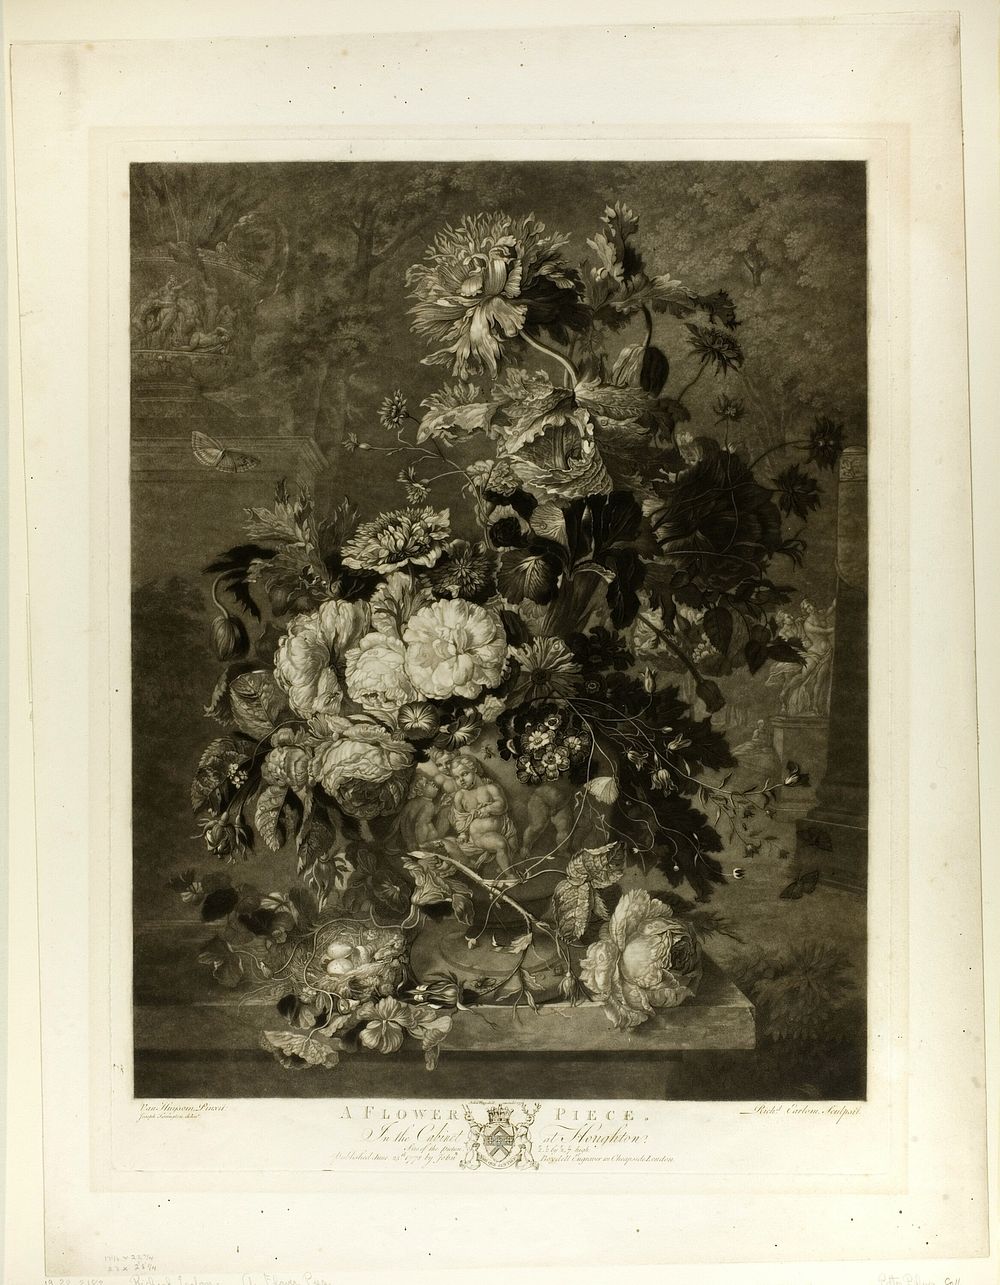 A Flower Piece, from The Houghton Gallery by Richard Earlom